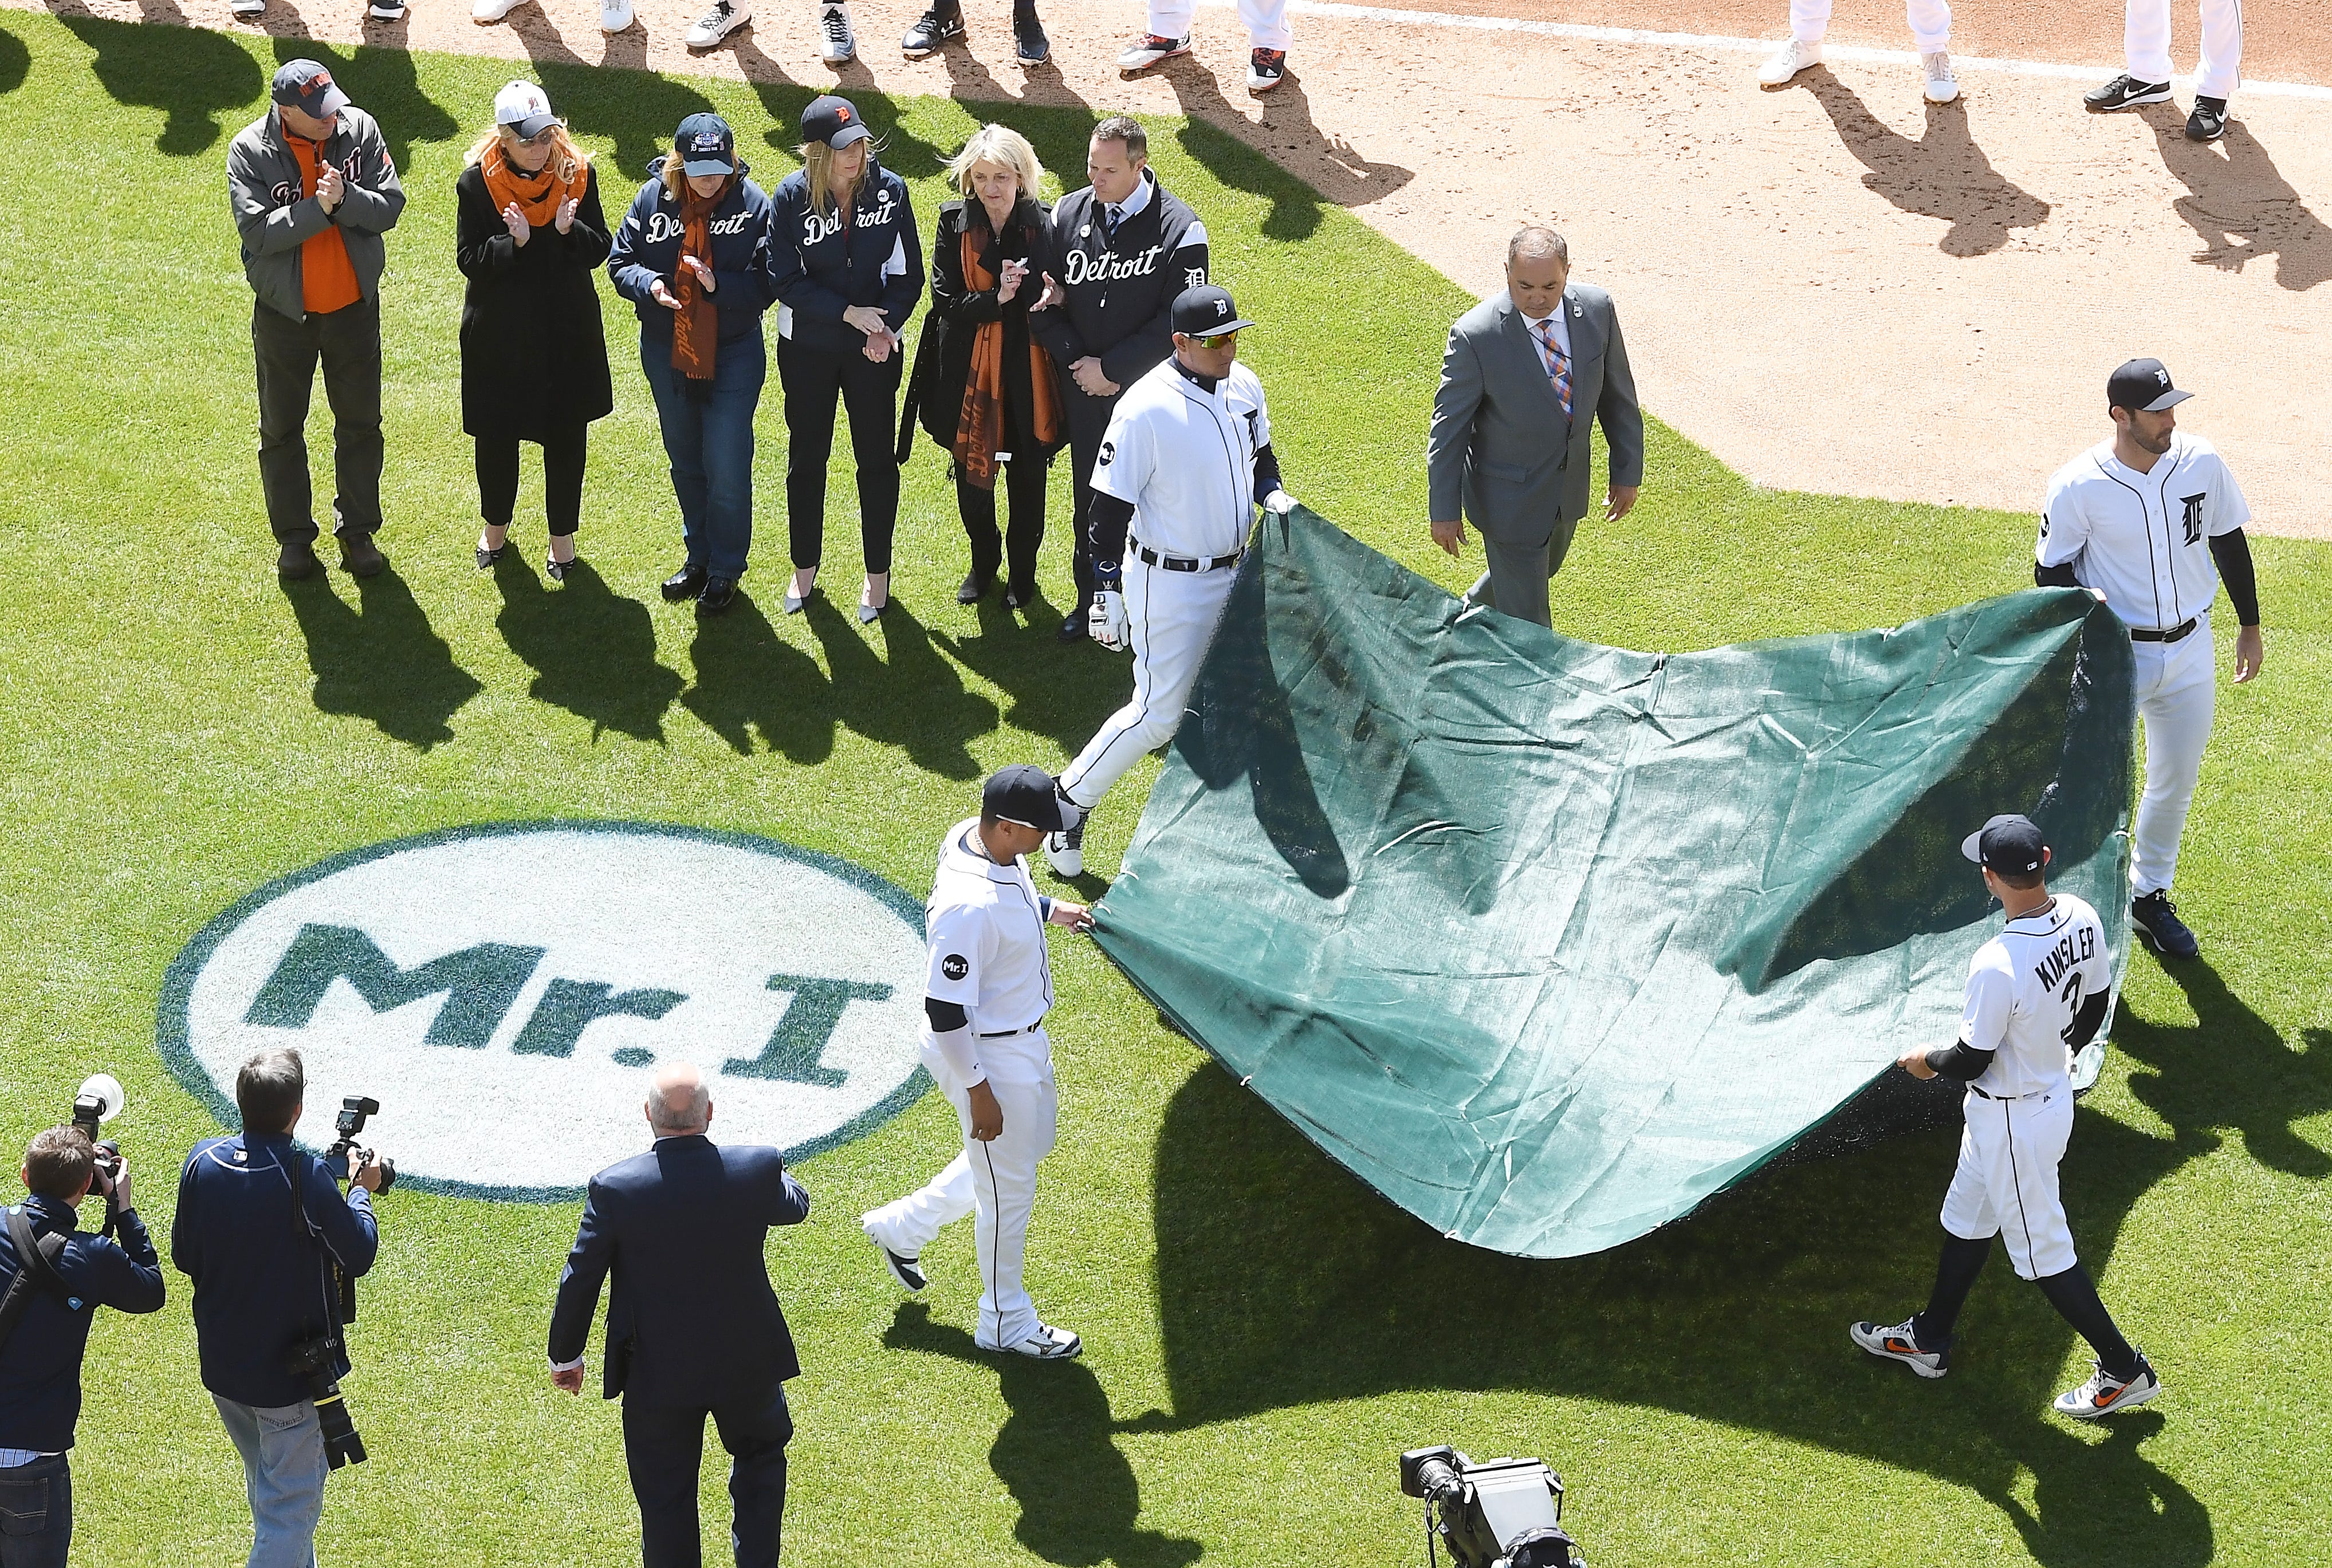 Detroit Tigers players Victor Martinez, Miguel Cabrera, Justin Verlander and Ian Kinsler remove the tarp off of the 'Mr I' logo in front of the Tigers bench to commemorate owner Mike Ilitch, who passed during the offseason, with wife Marian Ilitch and members of the family looking on. MLB Detroit Tigers opening day against the Boston Red Sox at Comerica Park in Detroit, Michigan on April 7, 2017.